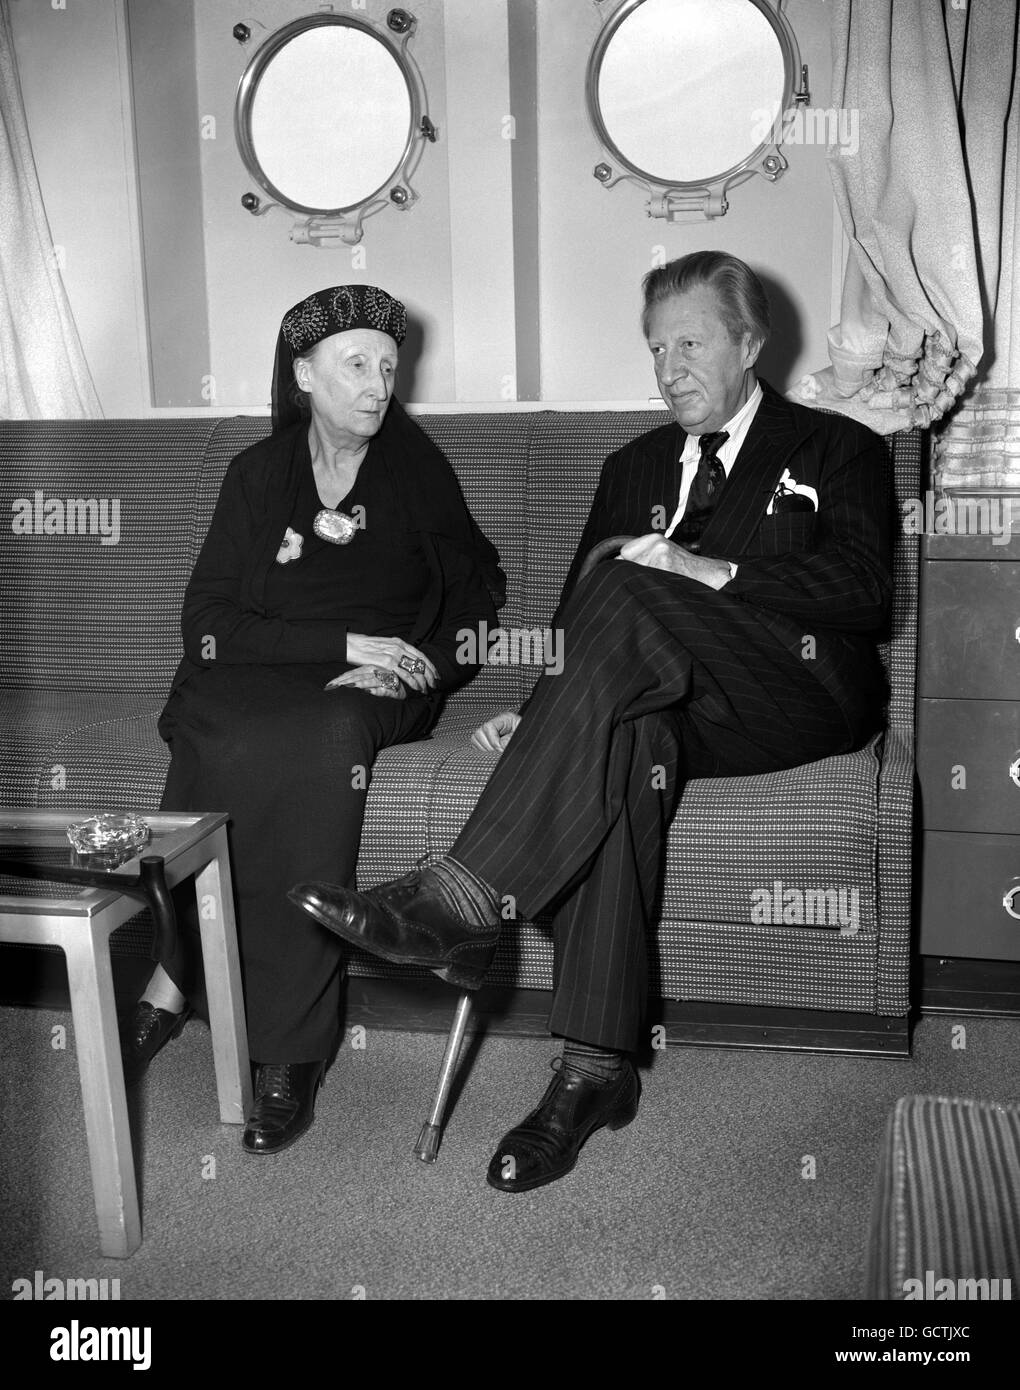 Poet Sir Osbert Sitwell with his sister Dame Edith Sitwell, poet, critic, lecturer and wit, as she arrives at Southampton on aboard the liner United states from America, where she has been giving readings of her poetry. On a visit to Hollywood, Dame Edith met Marilyn Monroe, brought from the film star the comment 'I think she is one of the most wonderful women I've ever met'. Stock Photo